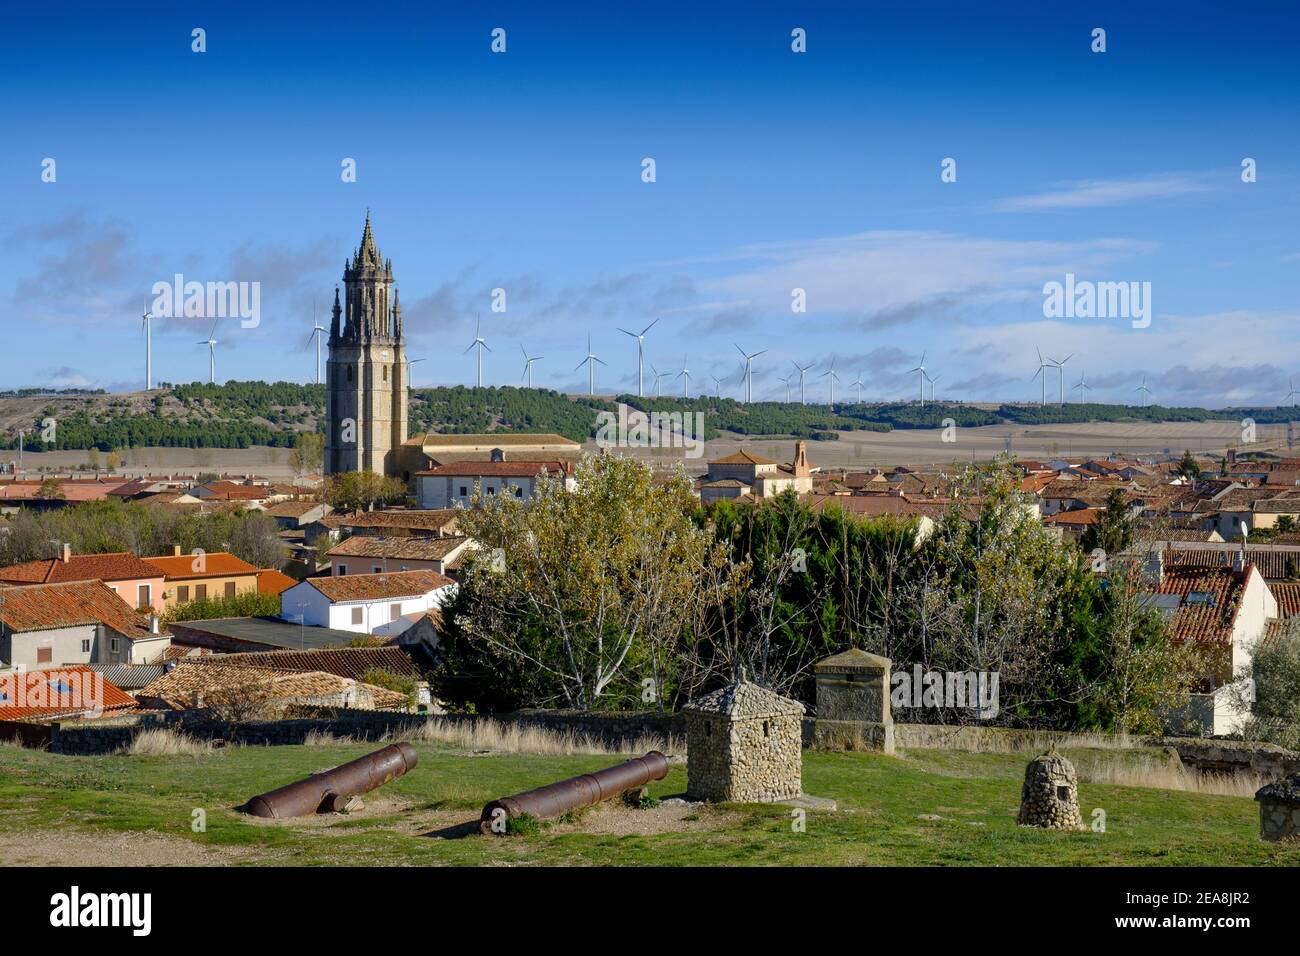 Contast of ancient and modern with wind turbines above the medieval town of Ampudia, Palencia Province, Castilla y Leon, Spain Stock Photo